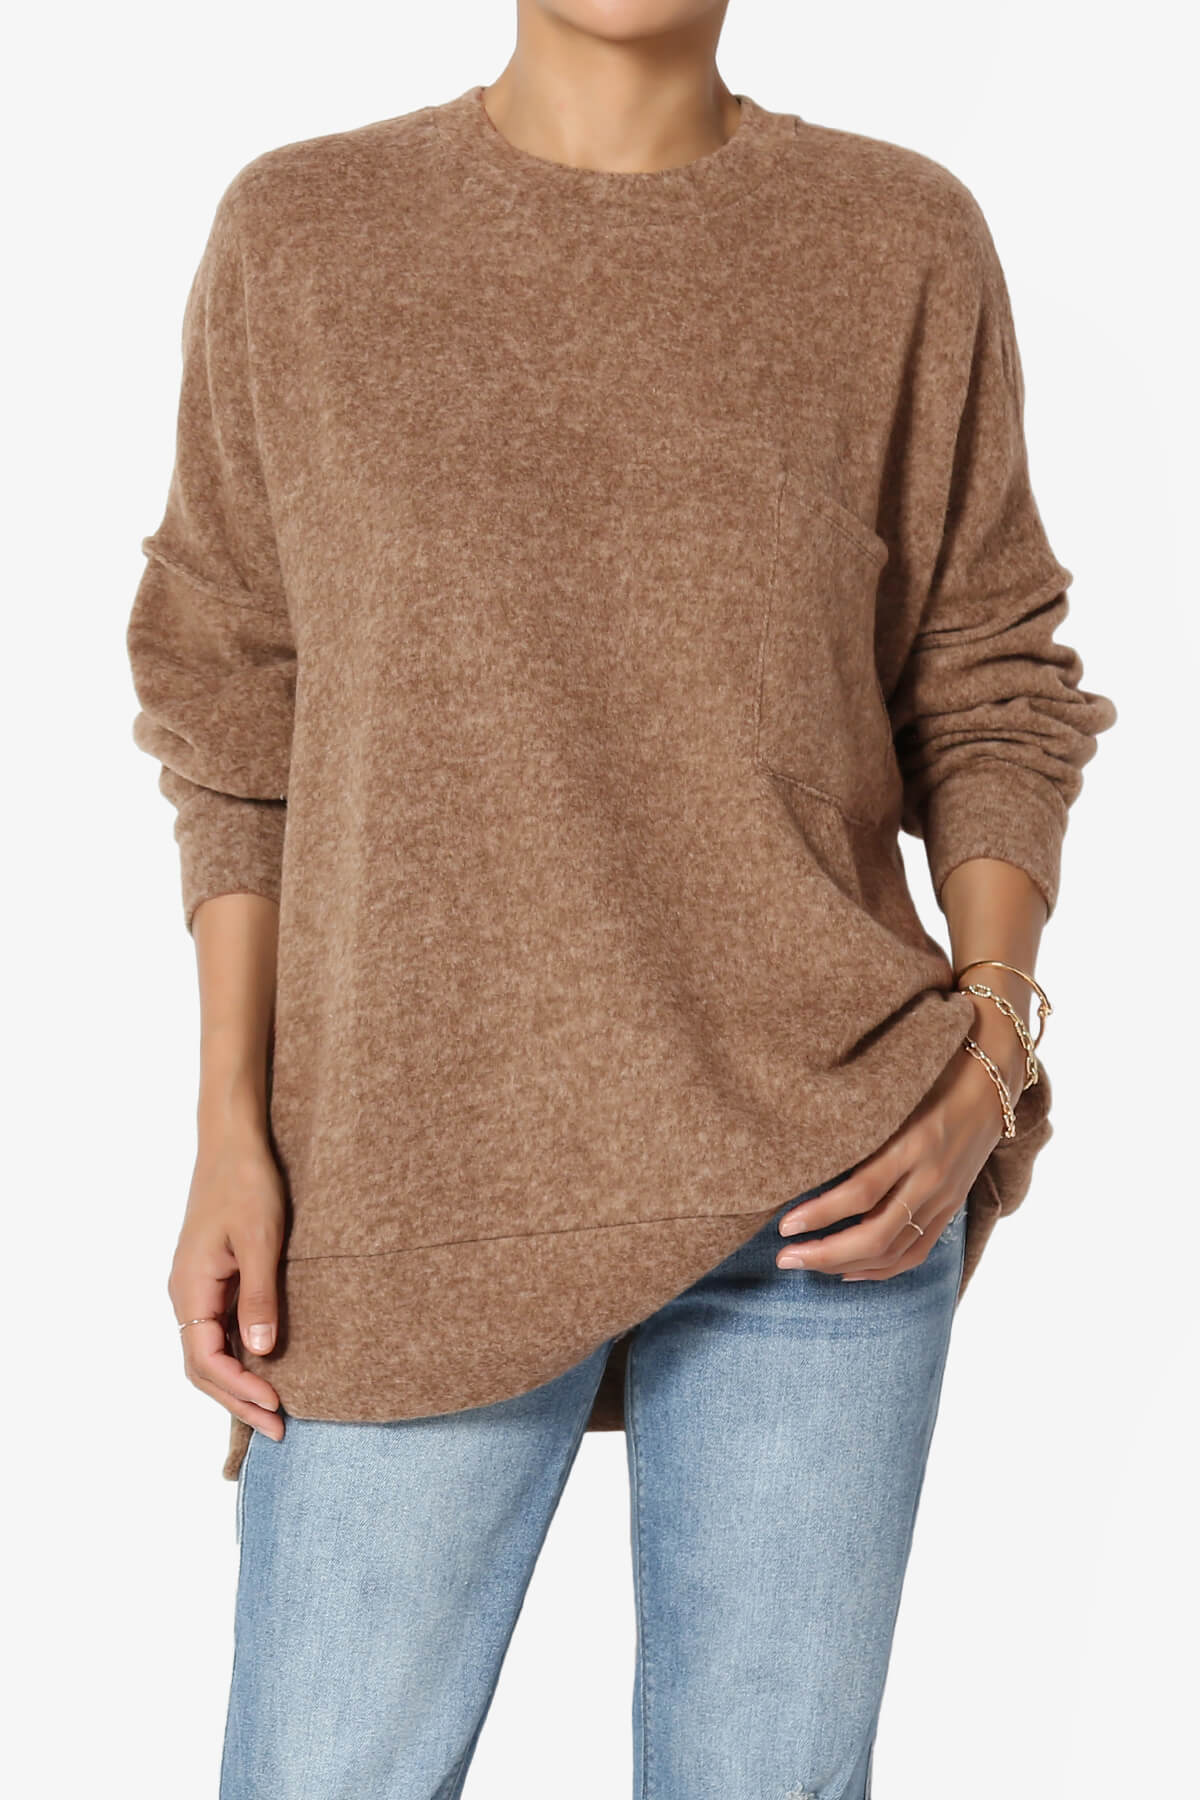 Load image into Gallery viewer, Breccan Blushed Knit Oversized Sweater DARK CAMEL_1
